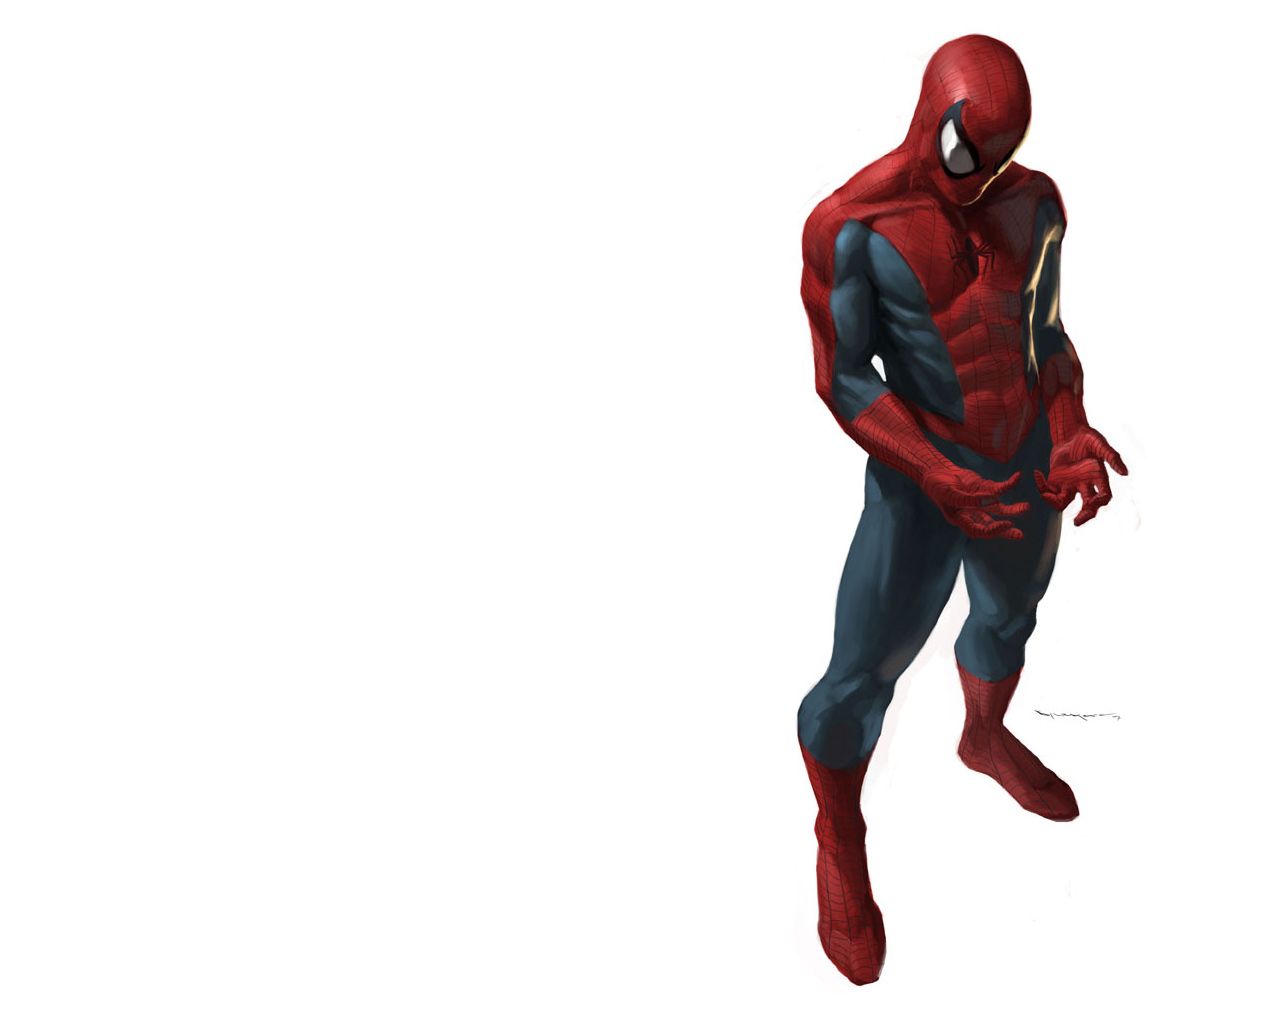 Marvel comics spider man wallpaper - (#171062) - High Quality and ...